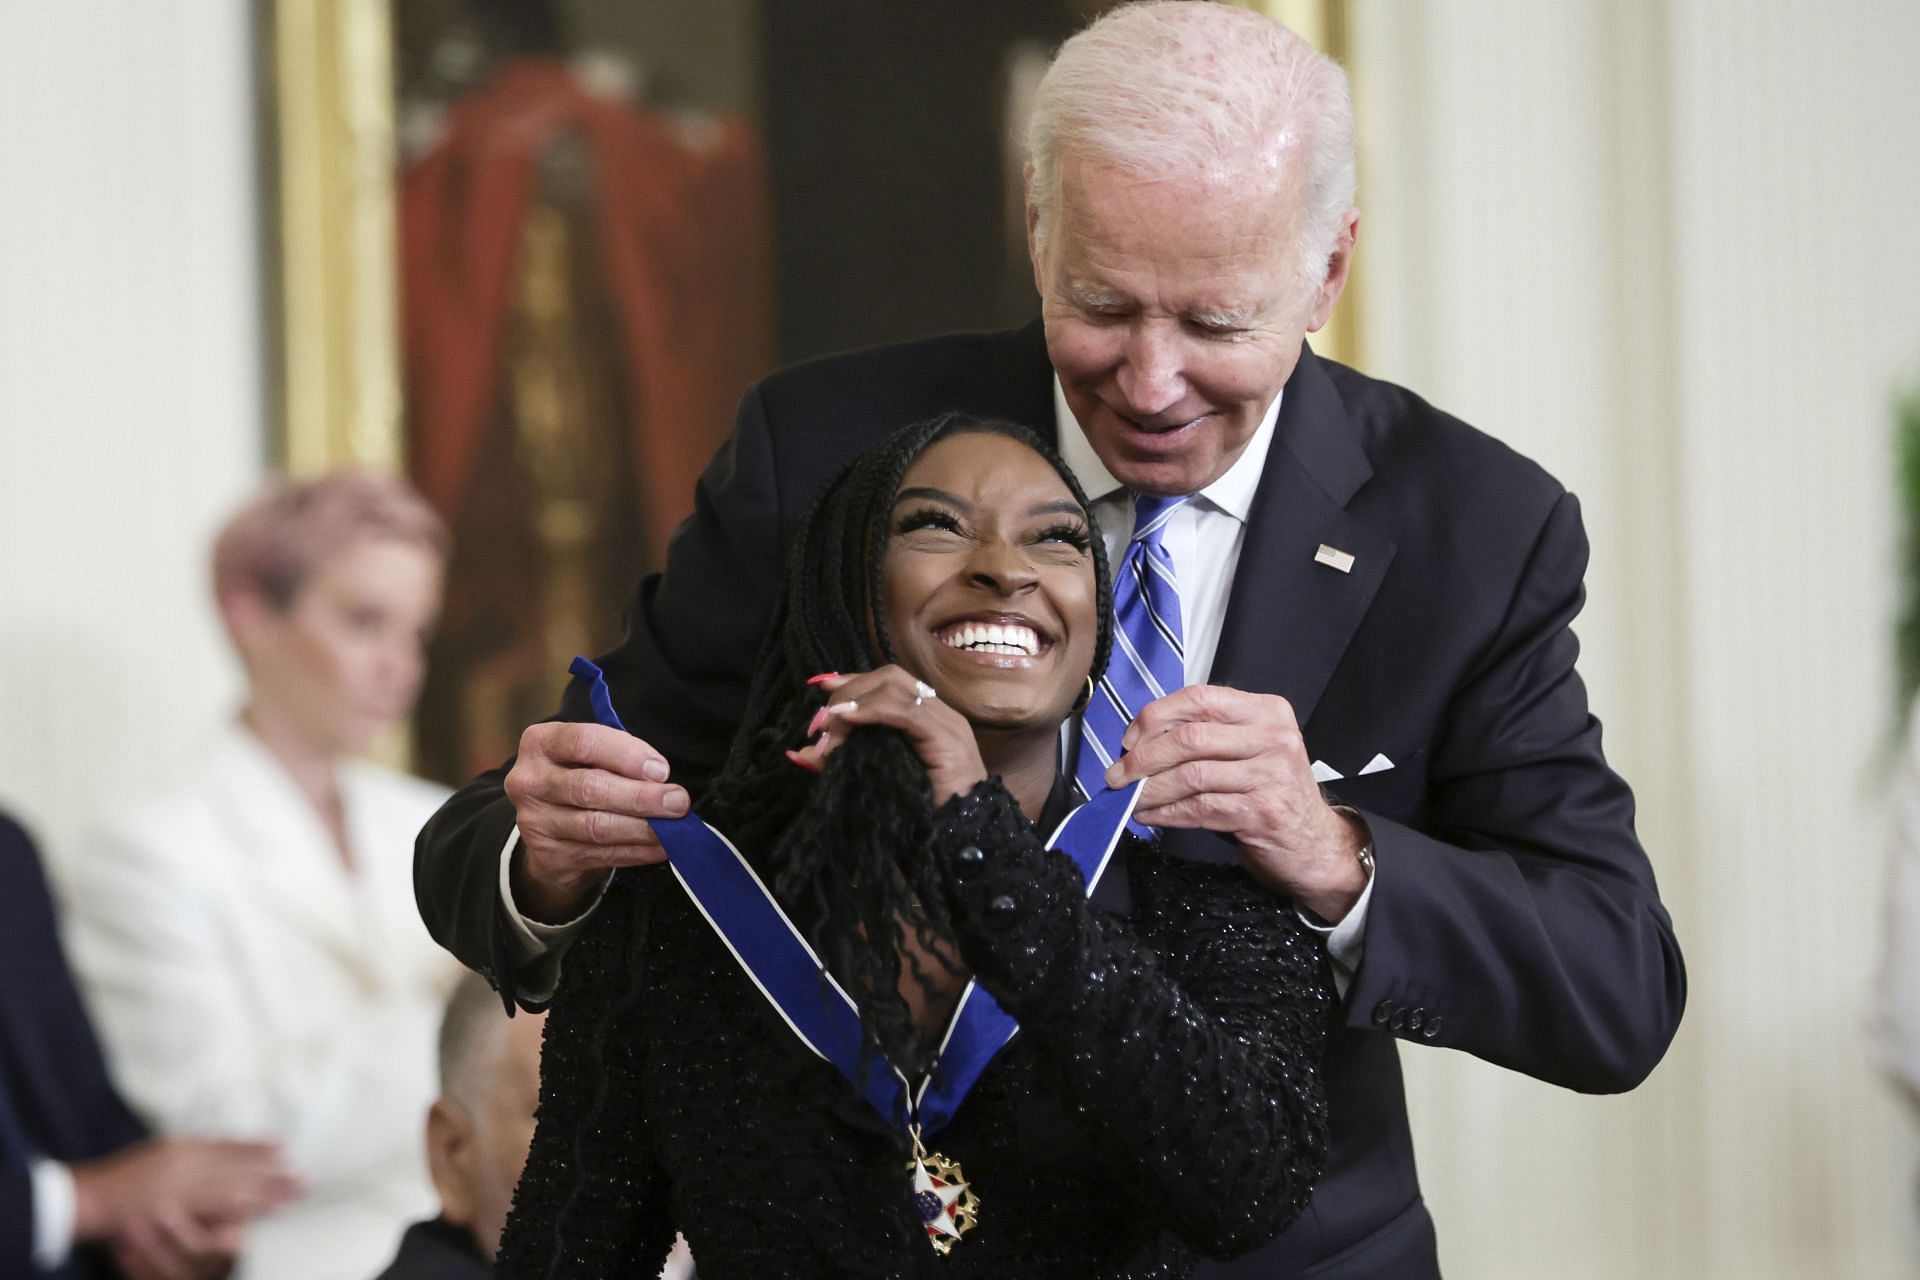 President Biden awarded the Presidential Medal Of Freedom to 17 Recipients